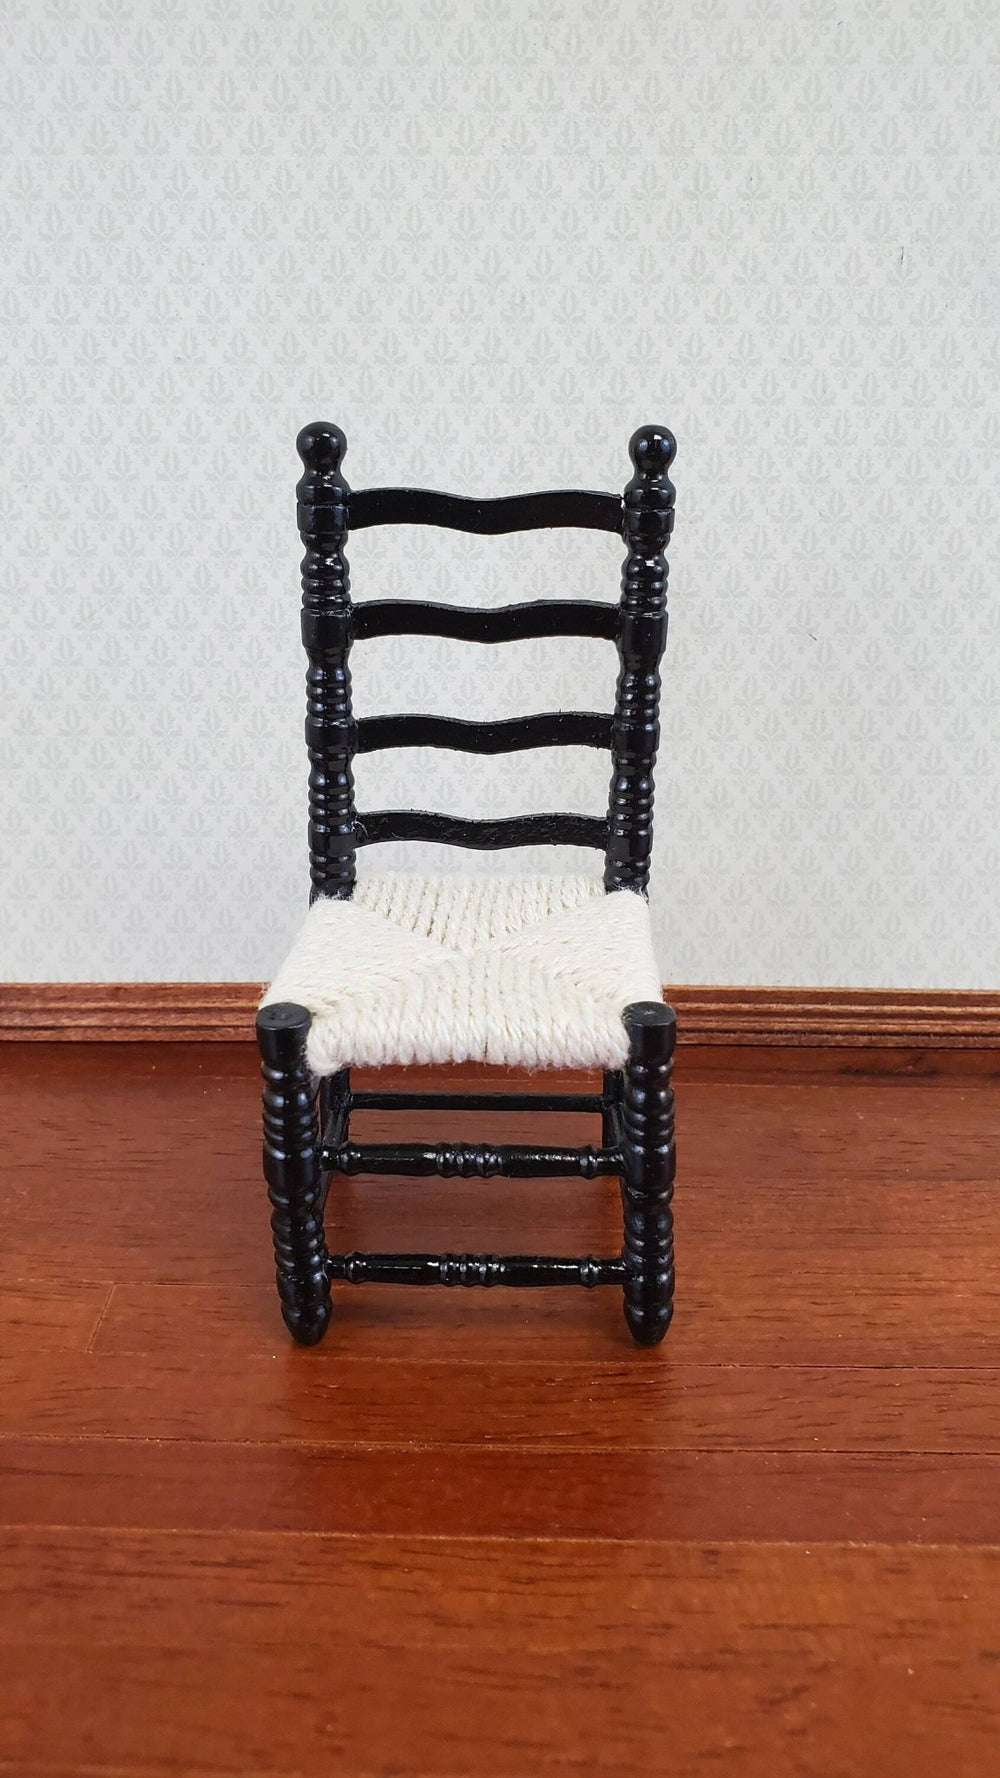 4 Vintage Dollhouse Miniature Ladder Back Chairs Rope Seats 1:12th